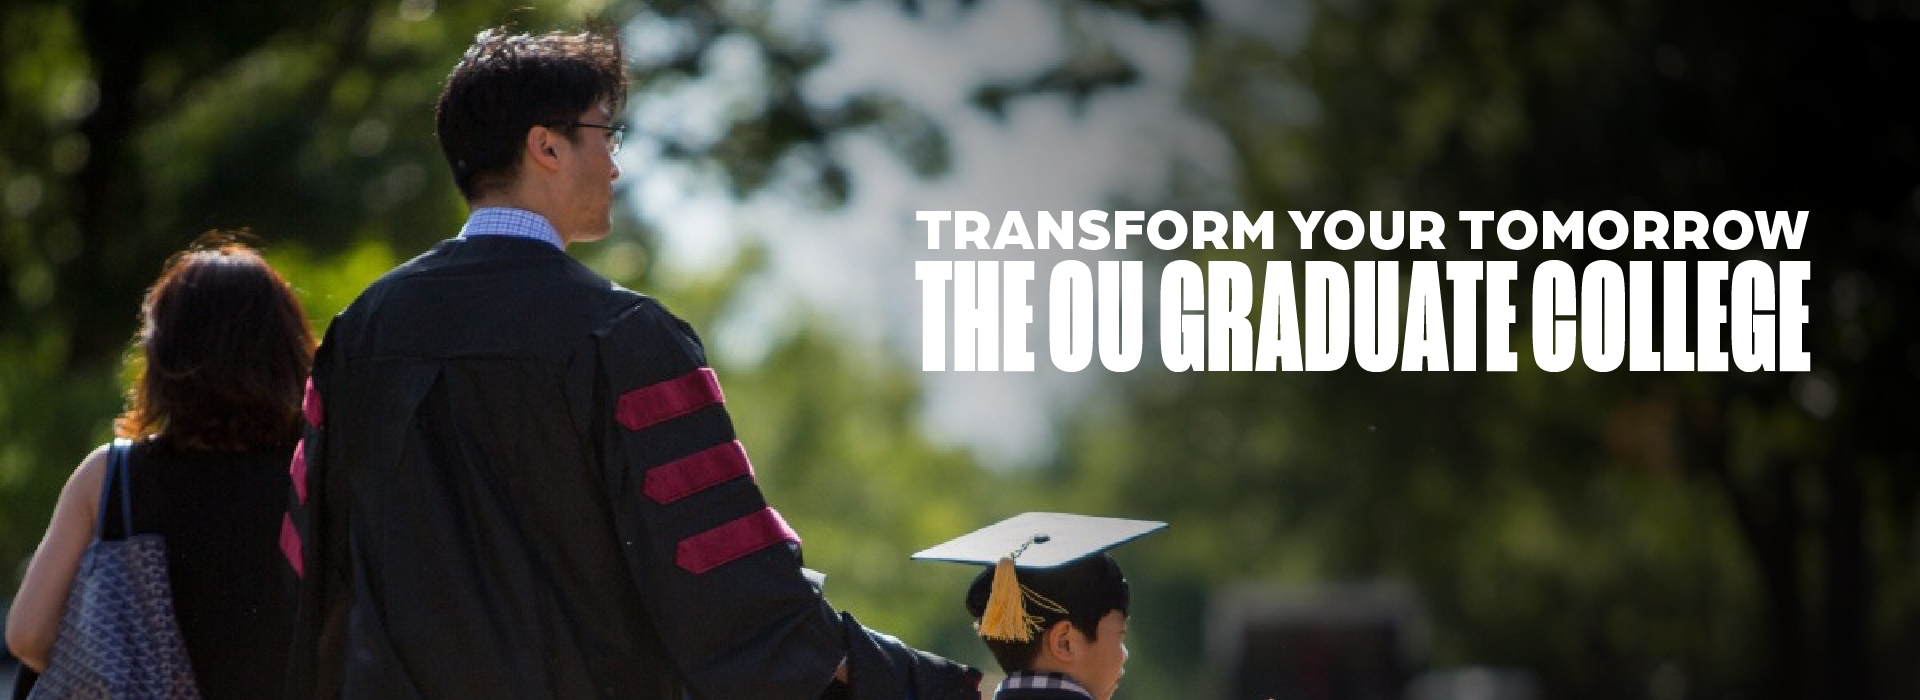 A crowd of students with a person pointing with the iconic "there's only one" hand gesture. The text on the graphic reads "there's only one OU Graduate College".